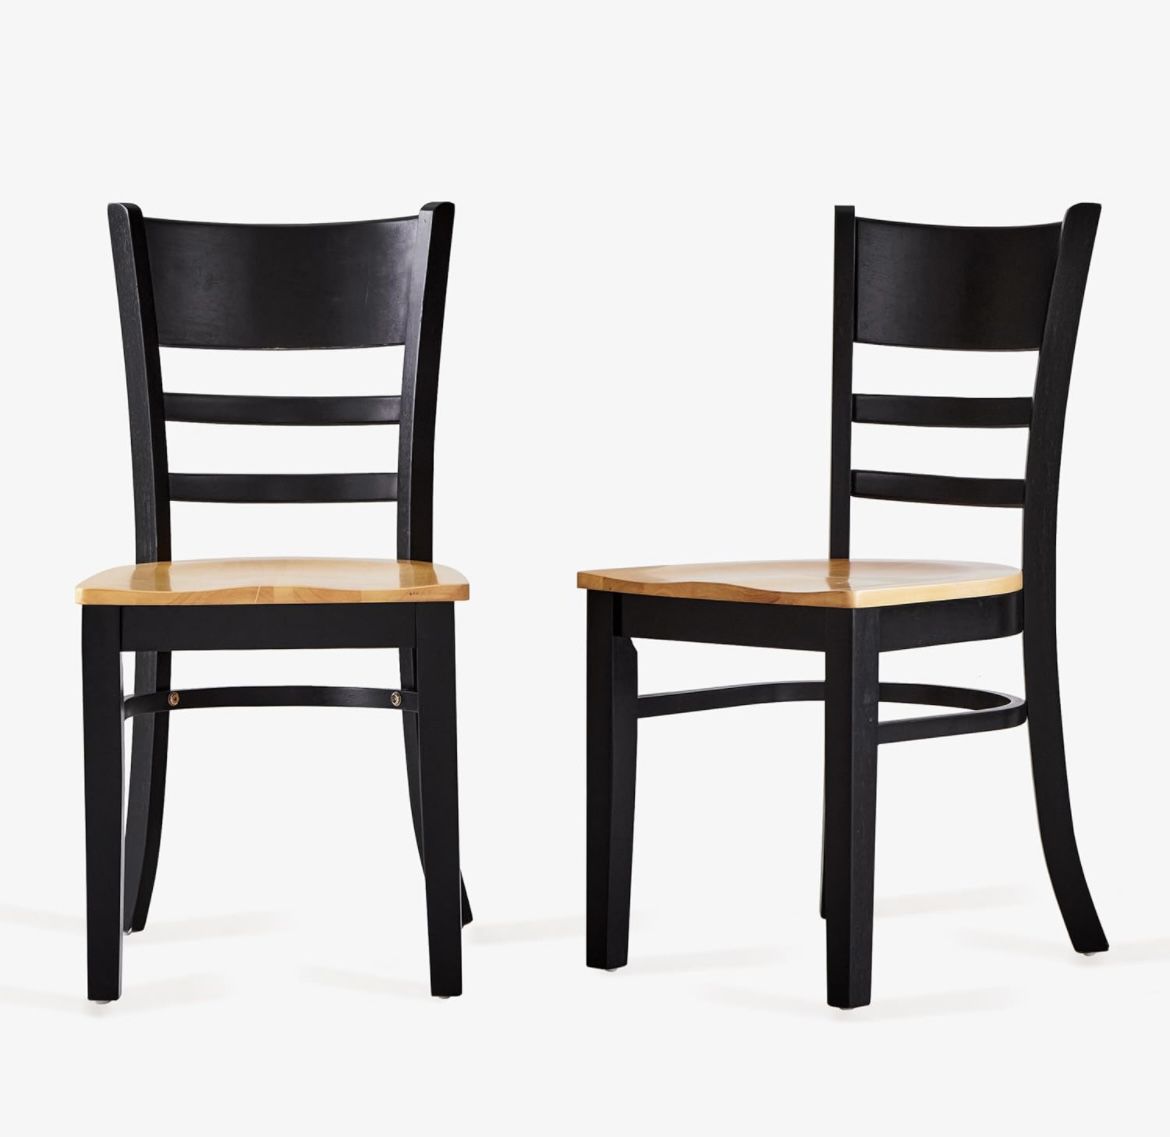 New Cabin Wooden Dining Chairs Set of 2 Two Toned Color 